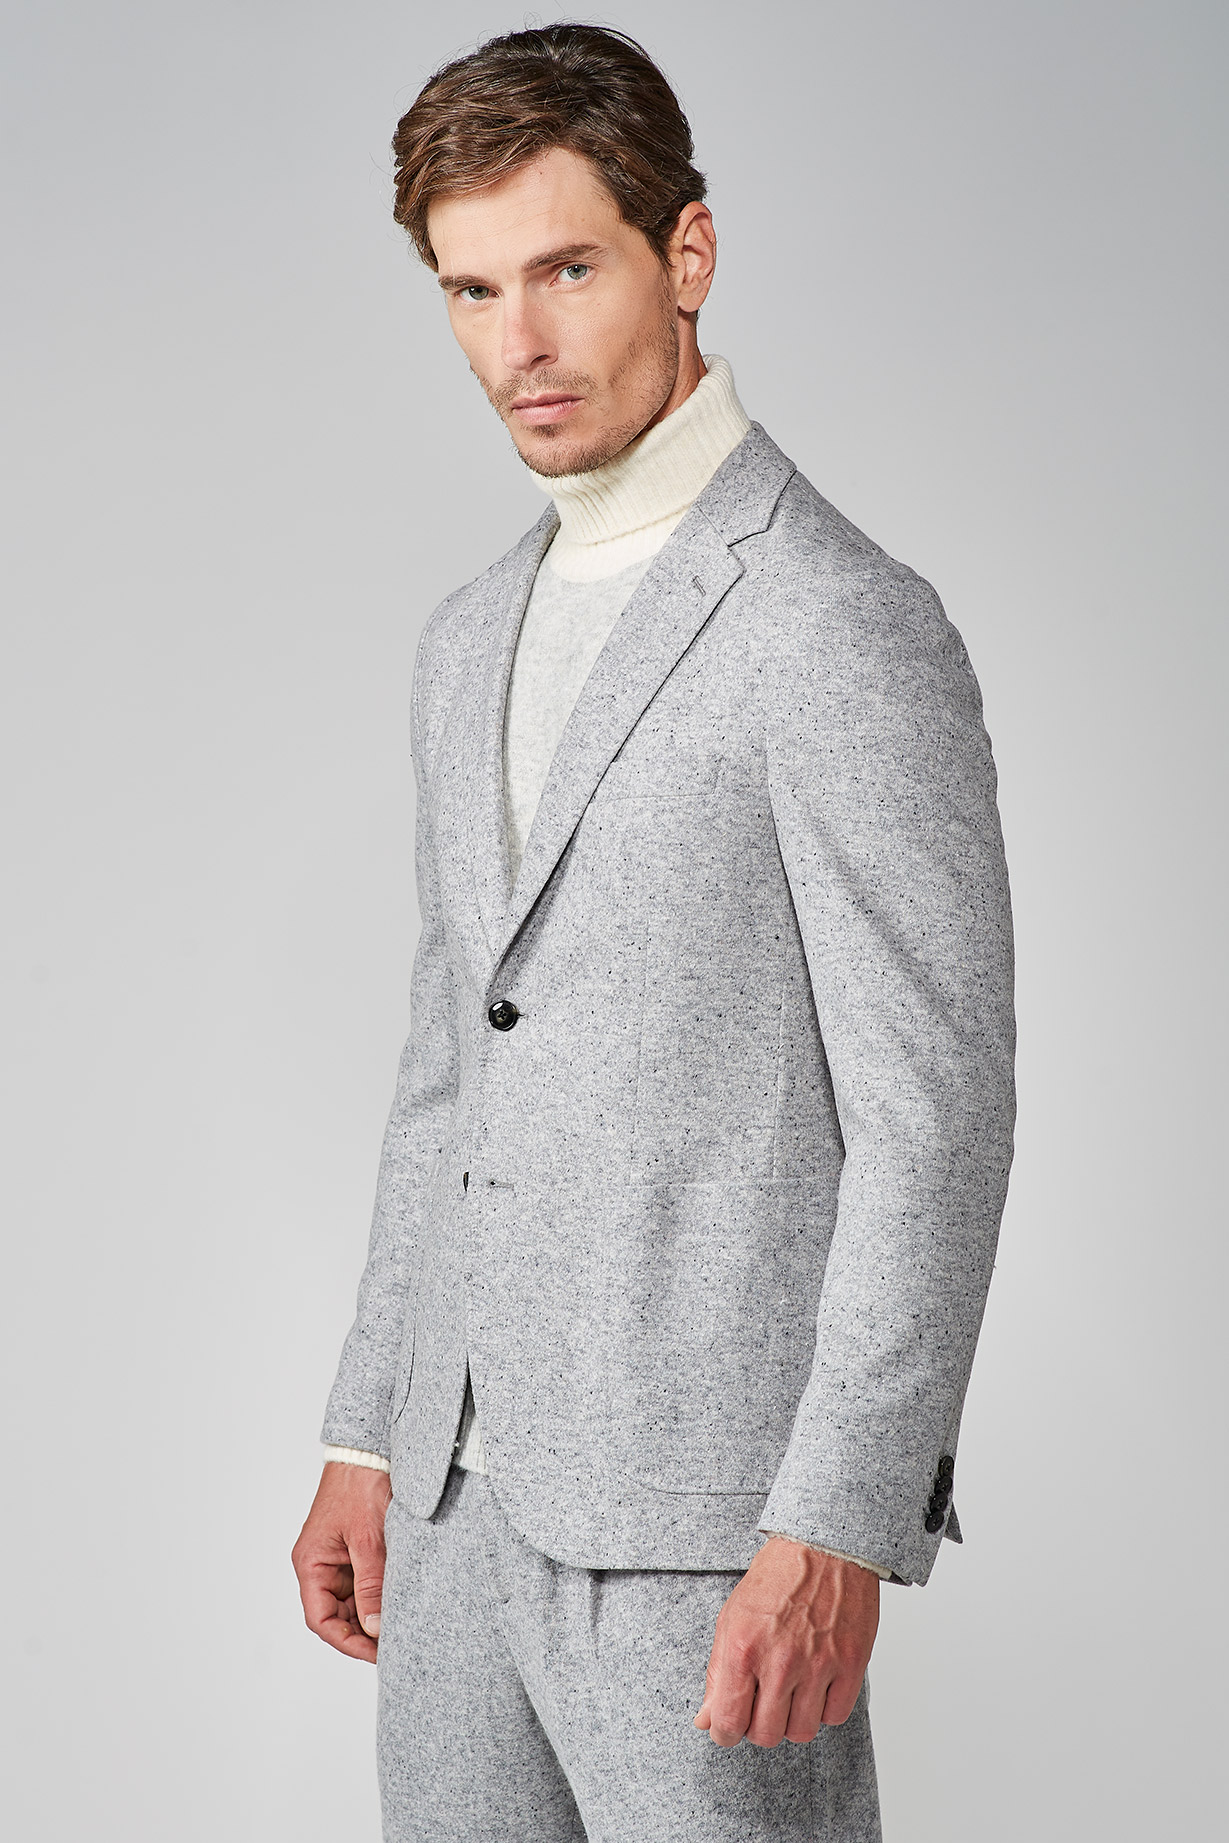 GREY BUTTONED KNITTED JERSEY JACKET